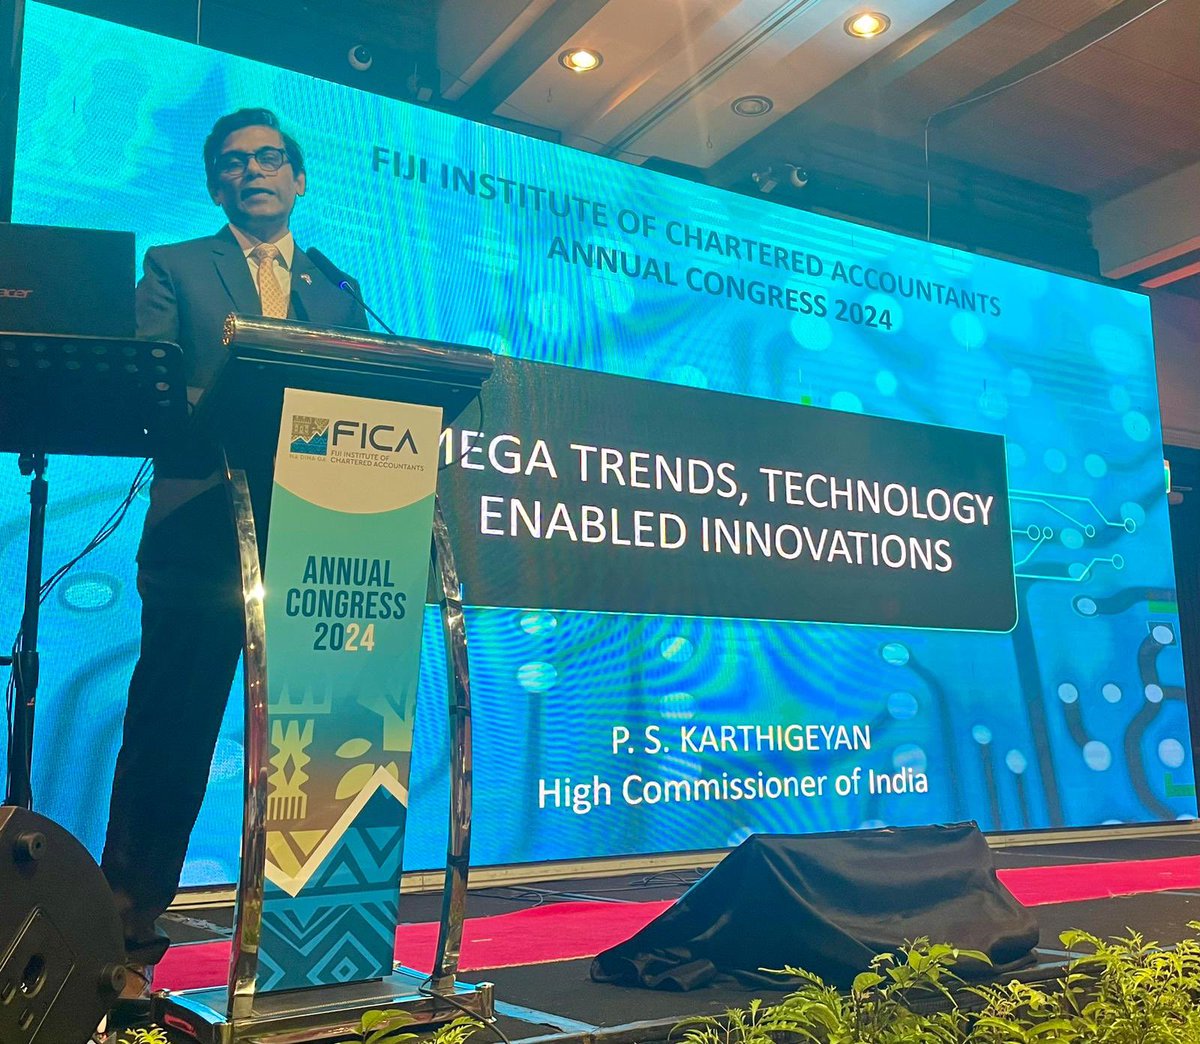 Delighted to join the session on “Mega Trends and Technology Enabled Innovations” today at the 2024 Annual Congress of #Fiji Institute of Chartered Accountants. Highlighted the extraordinary Digital Transformation in #India and the exciting opportunities ahead for collaboration.